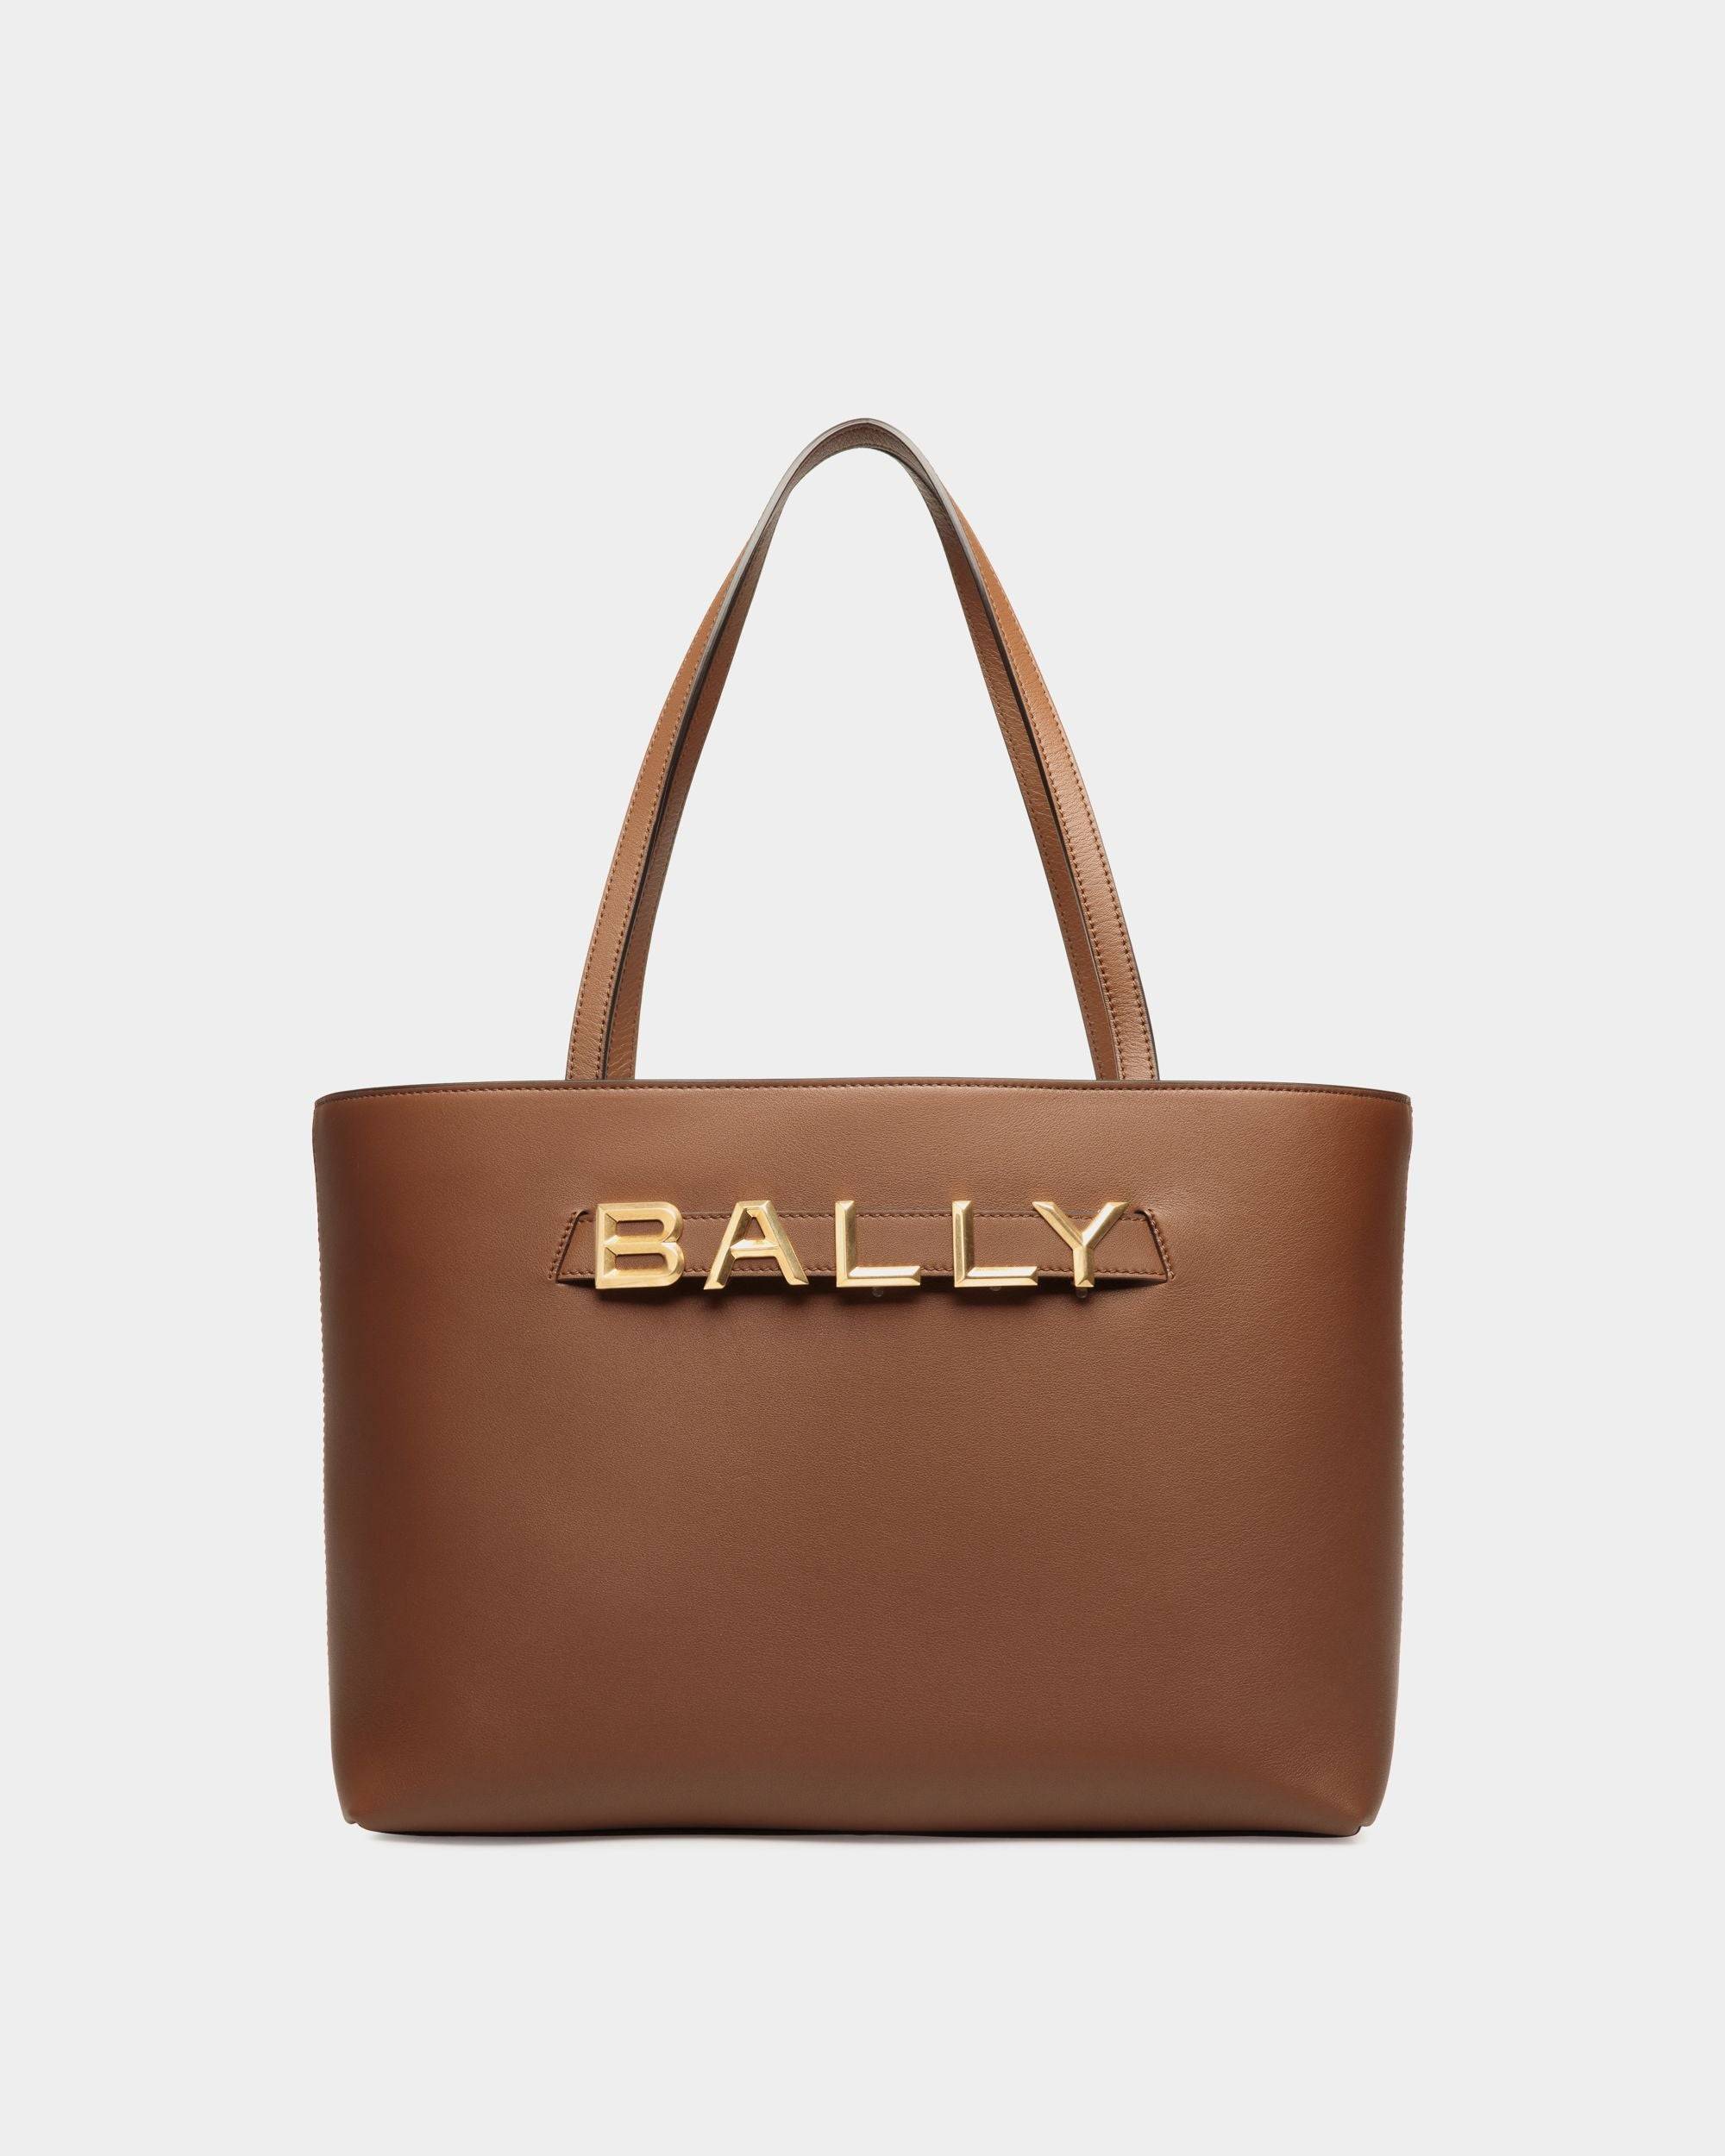 Bally Spell Tote Bag in Brown Leather - Women's - Bally